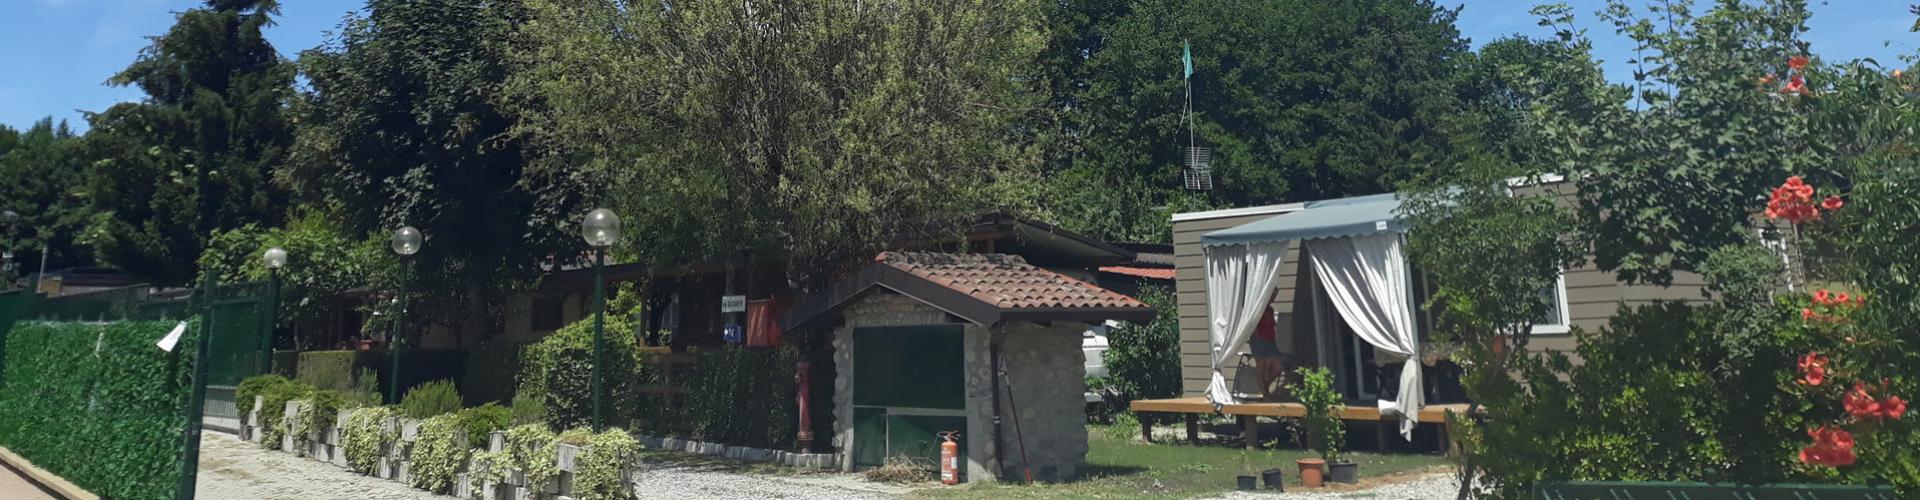 campingmontorfano it il-camping-in-3d 010